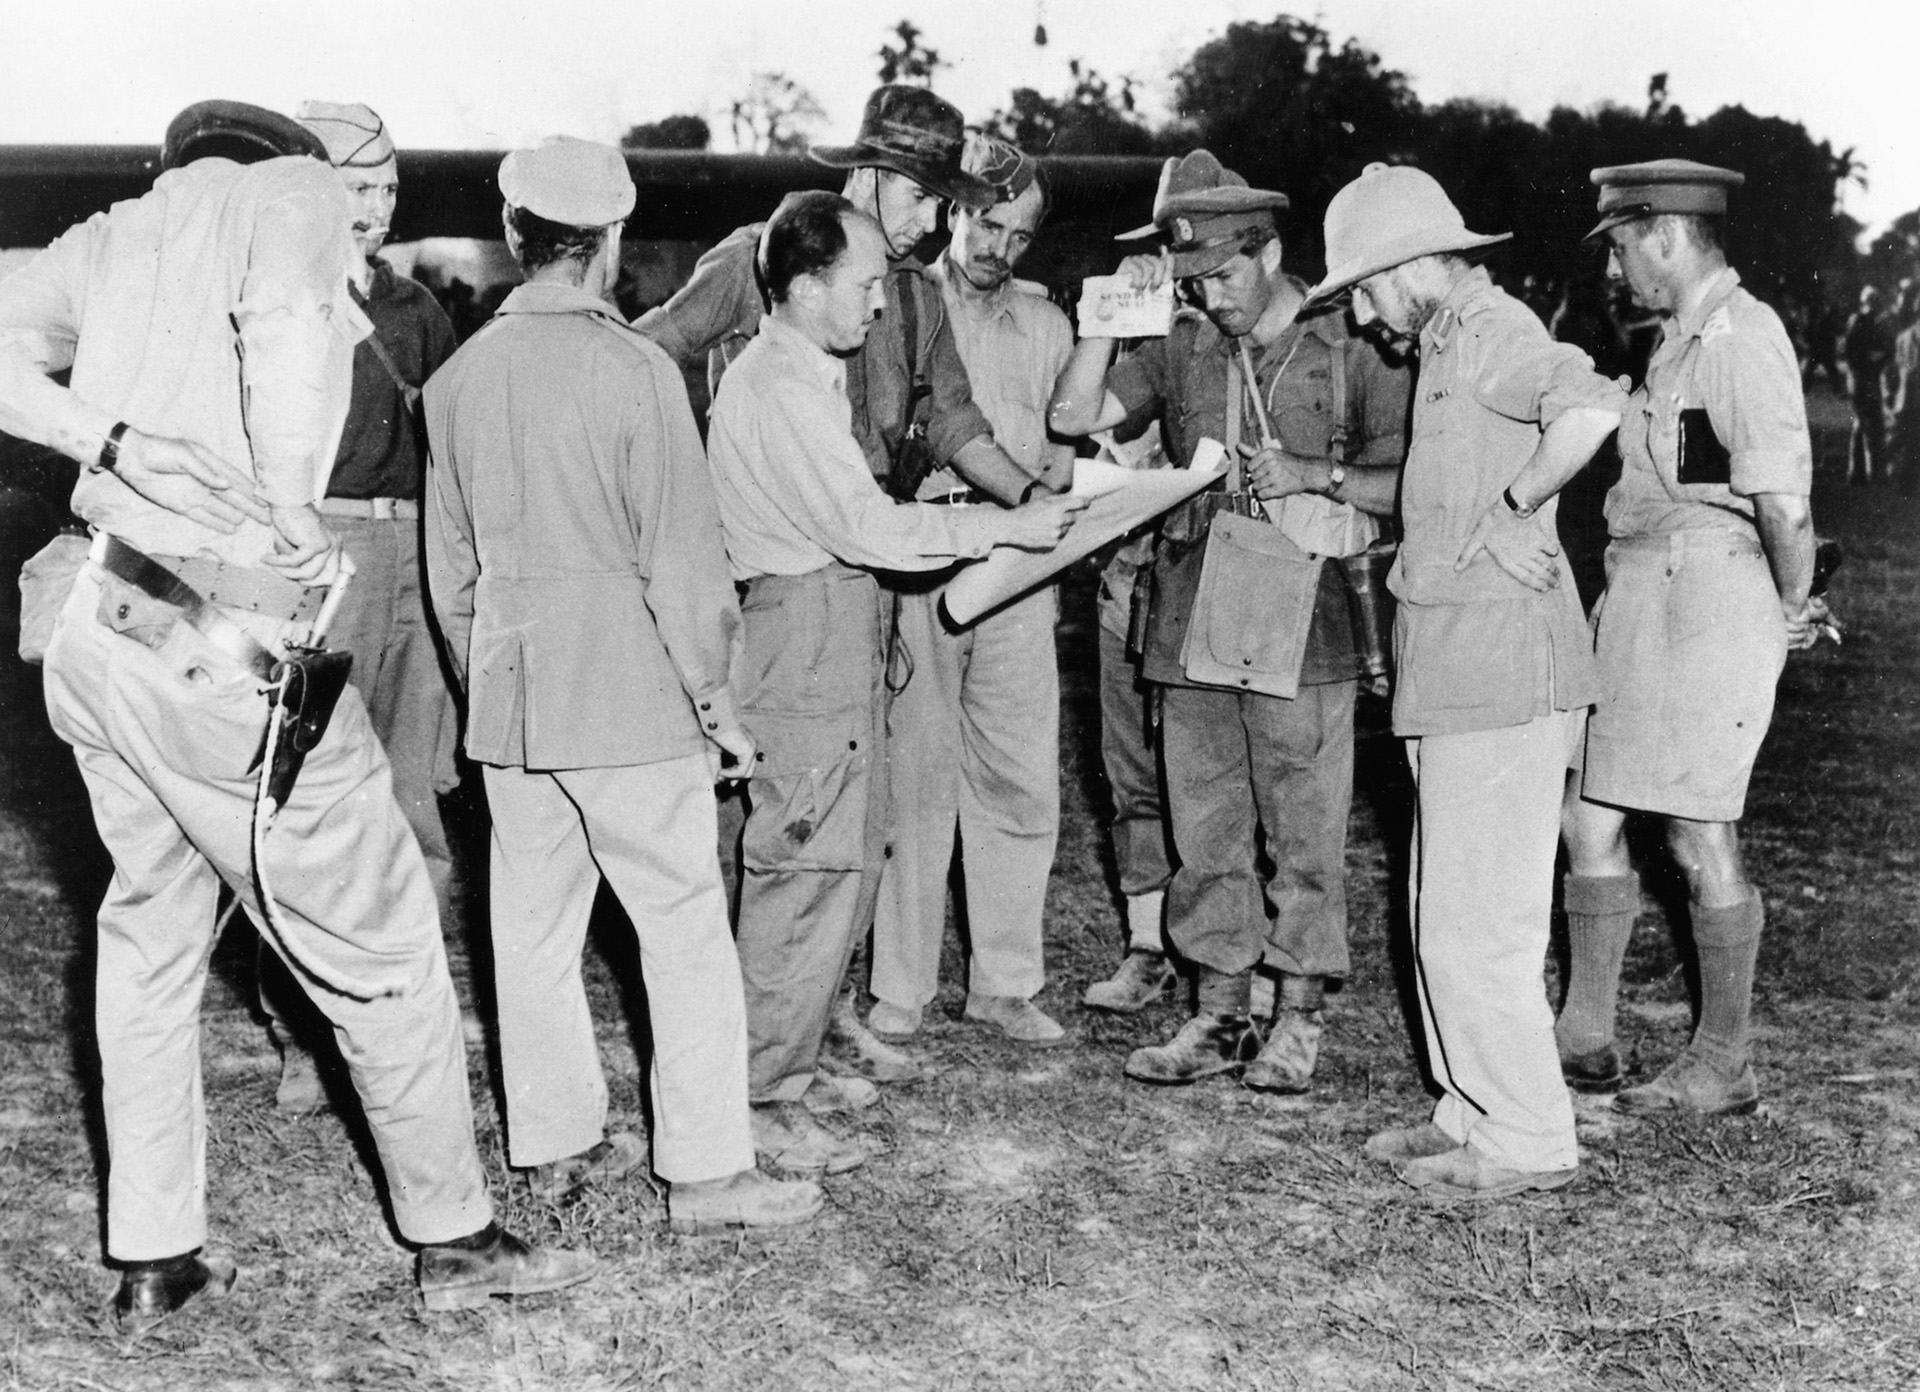 Brig. Gen. Orde Wingate, commander of the Chindits in Burma (far right), briefs staff officers before take-off near the main base at Sylhet, Assam. To Wingate’s immediate right, is Mike Calvert.